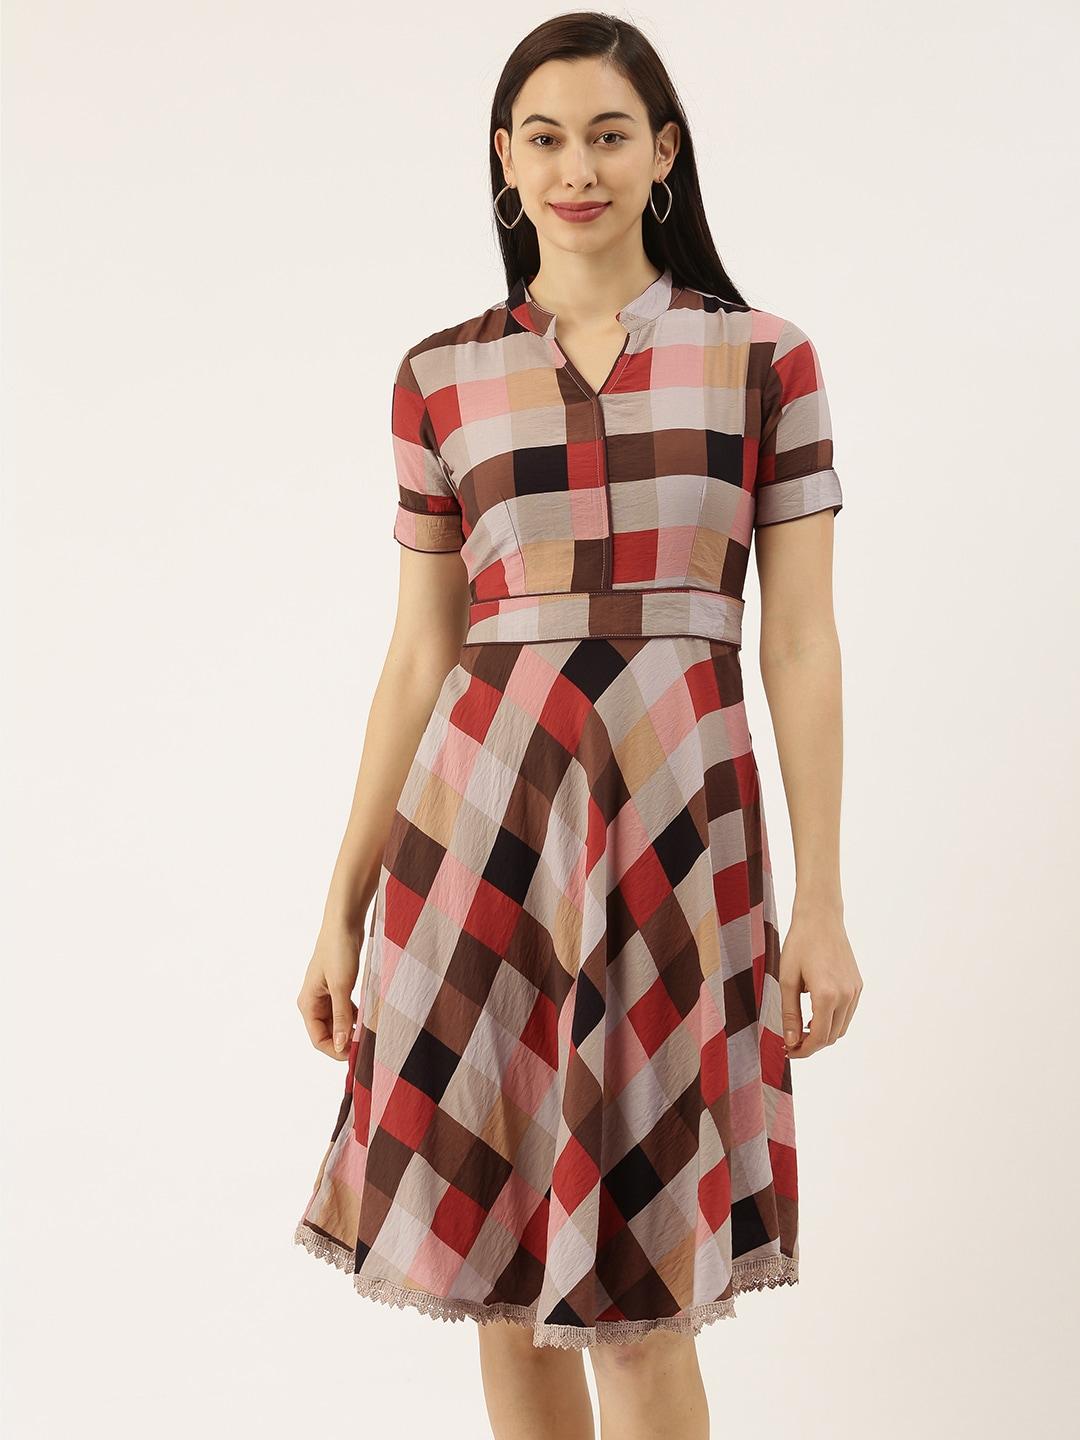 sheczzar-women-multicoloured-checked-fit-and-flare-dress-with-lace-inserts